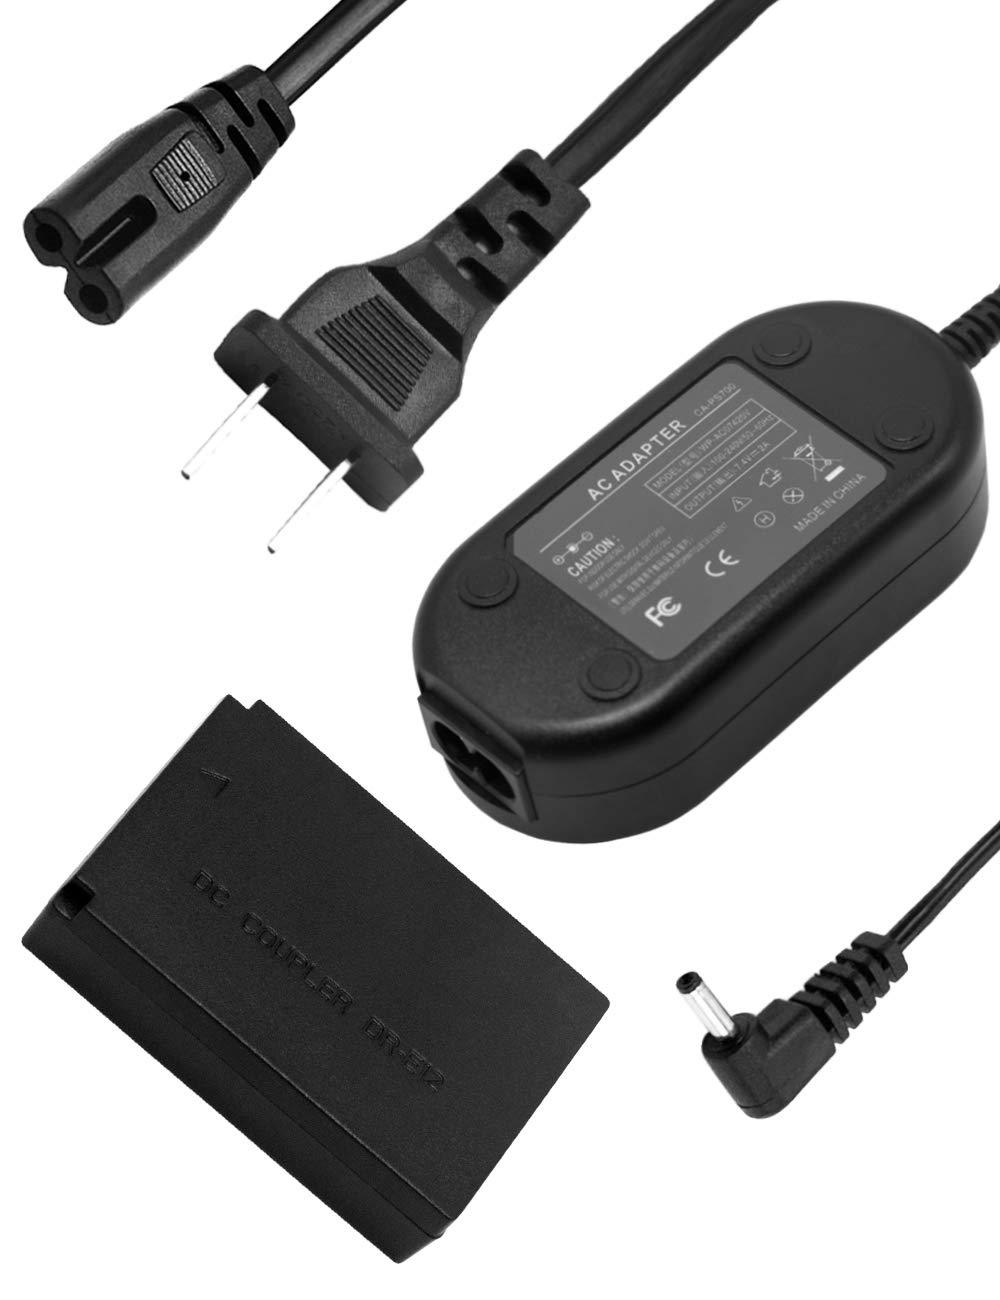 Wmythk ACK-E12 AC Power Adapter and DR-E12 Dc Coupler Charger Kit Replacement for Canon EOS Series: EOS M, EOS M2, EOS M10, EOS M50, EOS M100 Mirrorless Digital Cameras